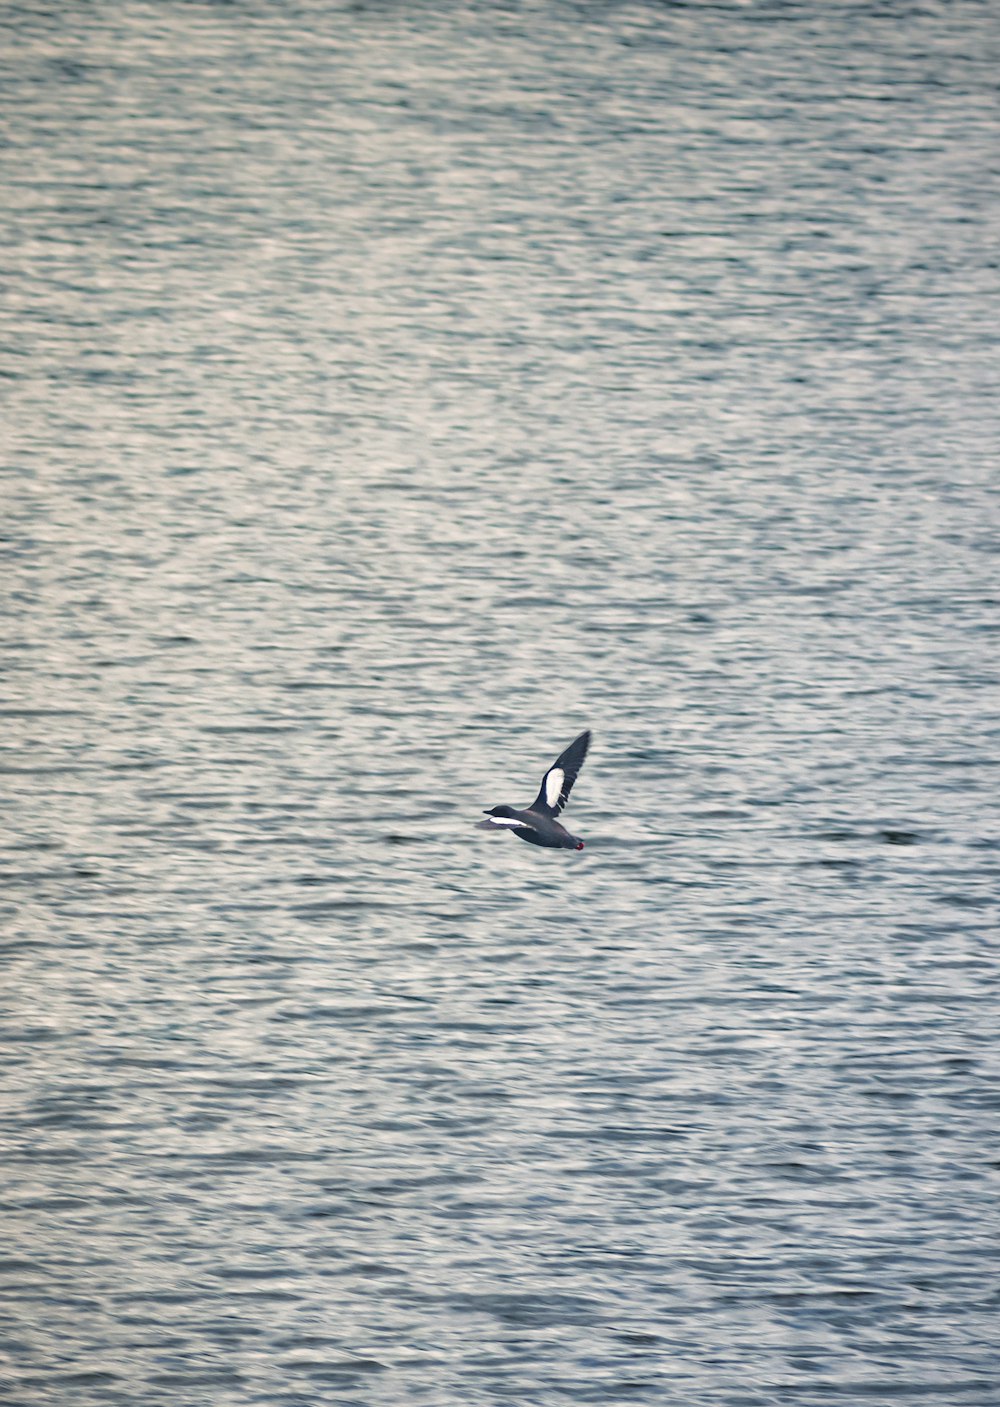 black and white bird flying over the sea during daytime